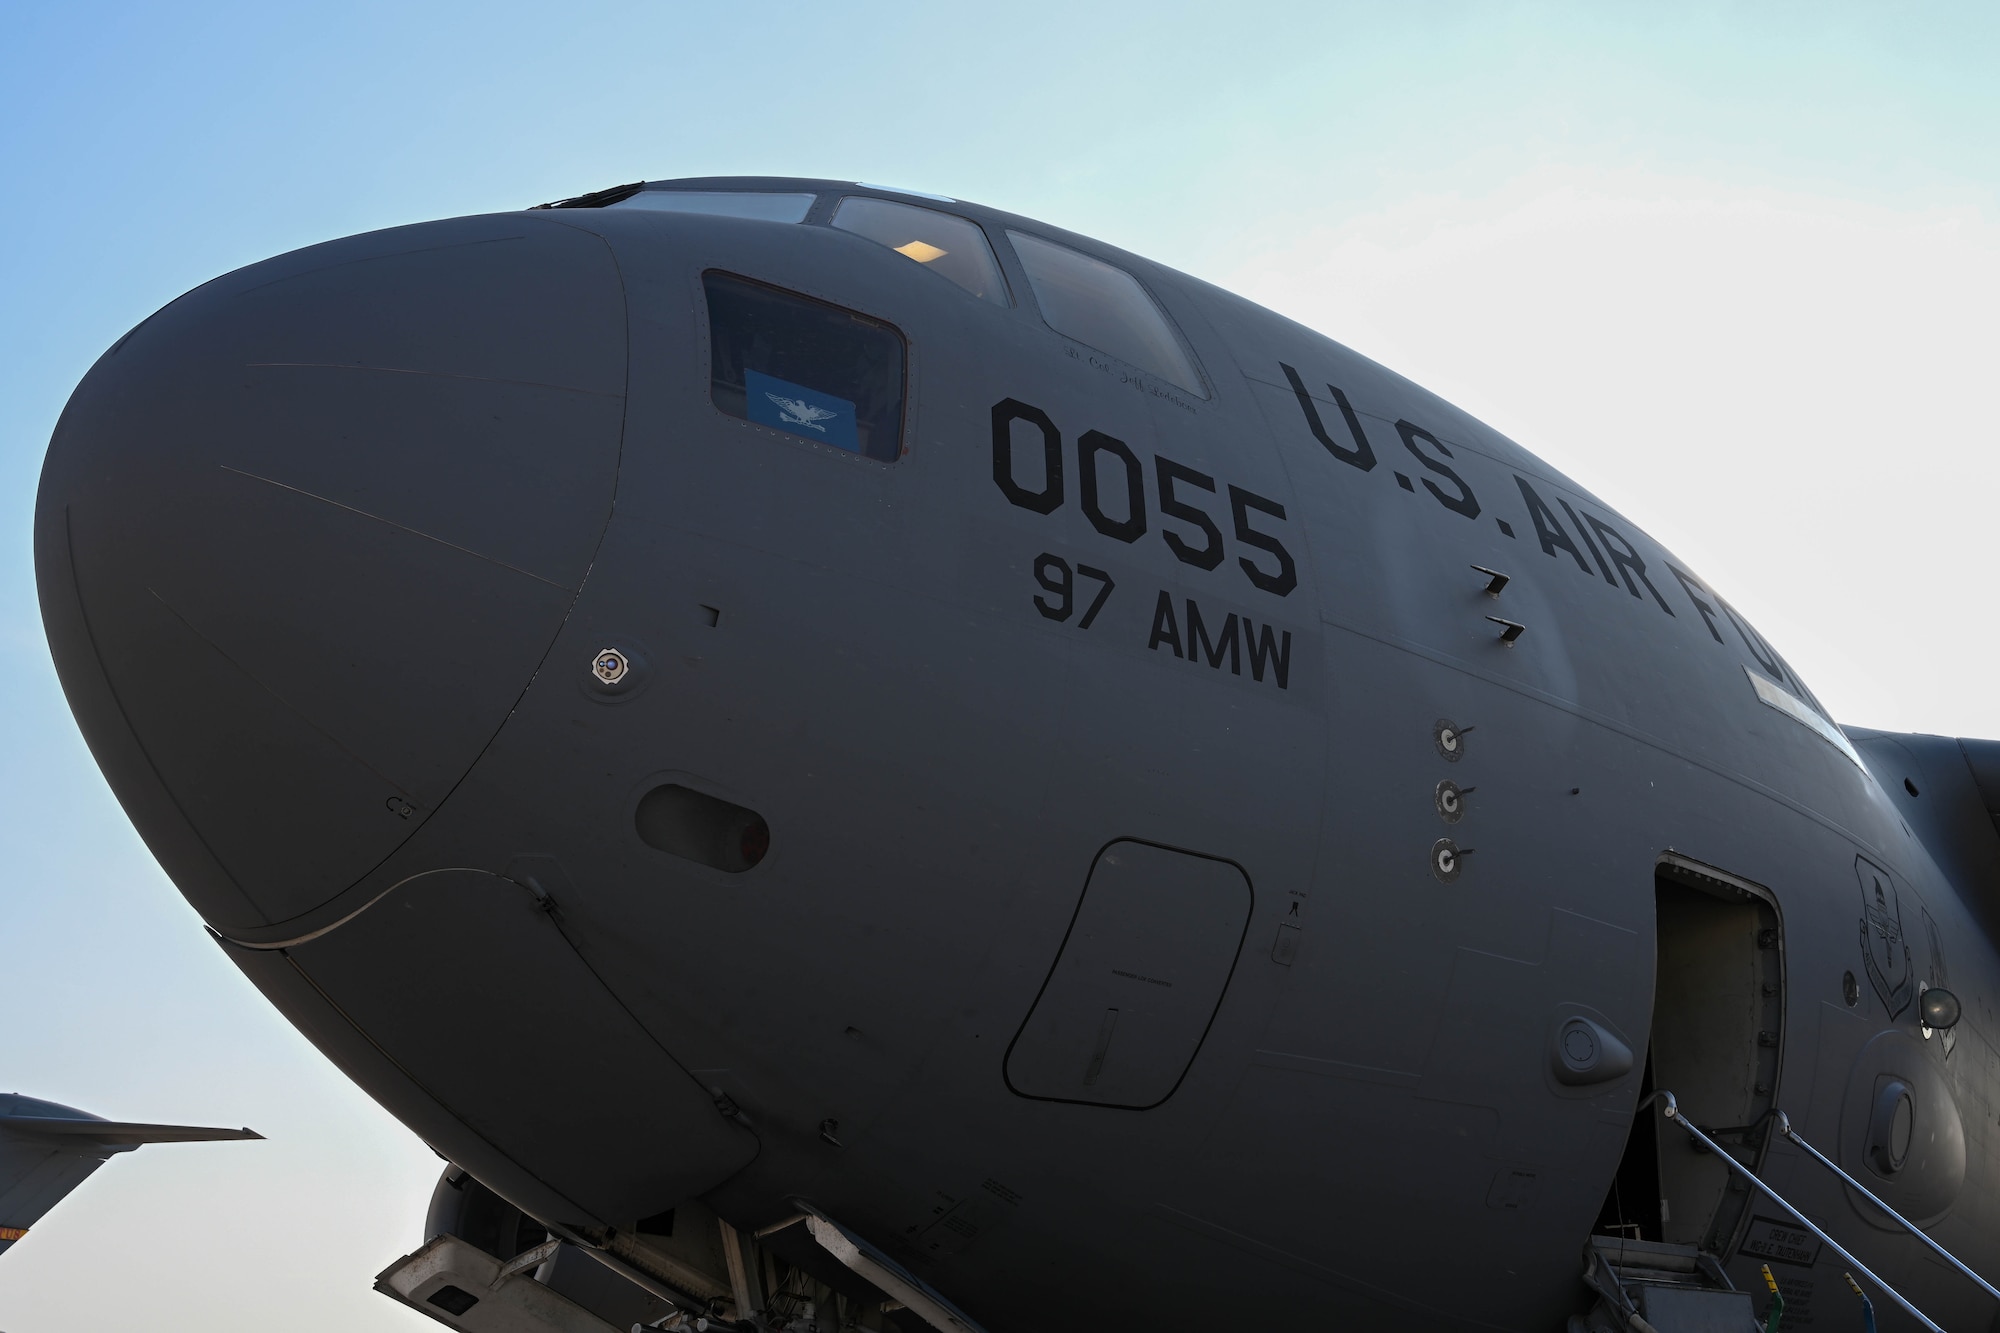 A C-17 Globemaster III aircraft sits on the flight line at Altus Air Force Base, Oklahoma, June 6, 2023. The C-17 is capable of rapid delivery of troops and all types of cargo to main operating bases, as well as perform tactical airlift and airdrop missions, making it the most flexible cargo aircraft in the airlift force. (U.S. Air Force photo by Senior Airman Trenton Jancze)